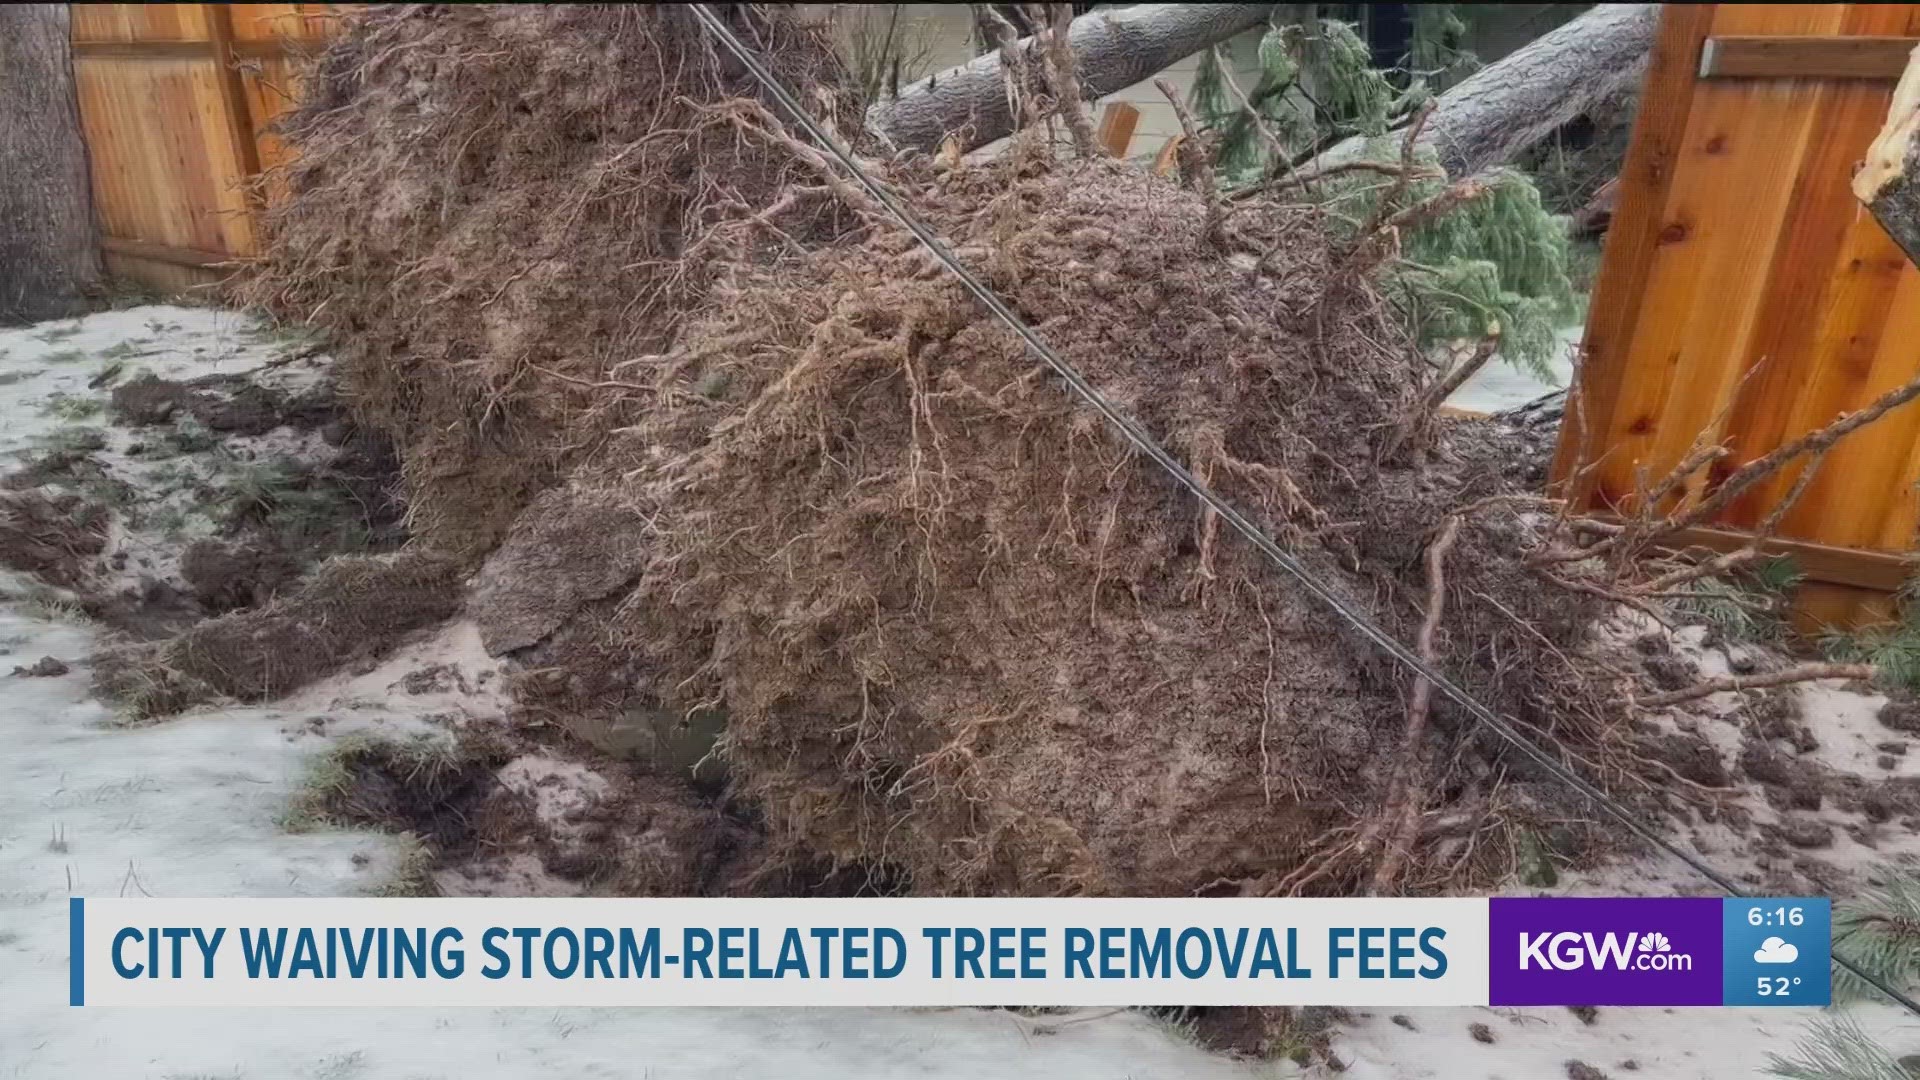 Portland is waiving tree removal and replanting application fees for any damages that occurred between Jan. 12-Feb. 23 to help with winter storm recovery.